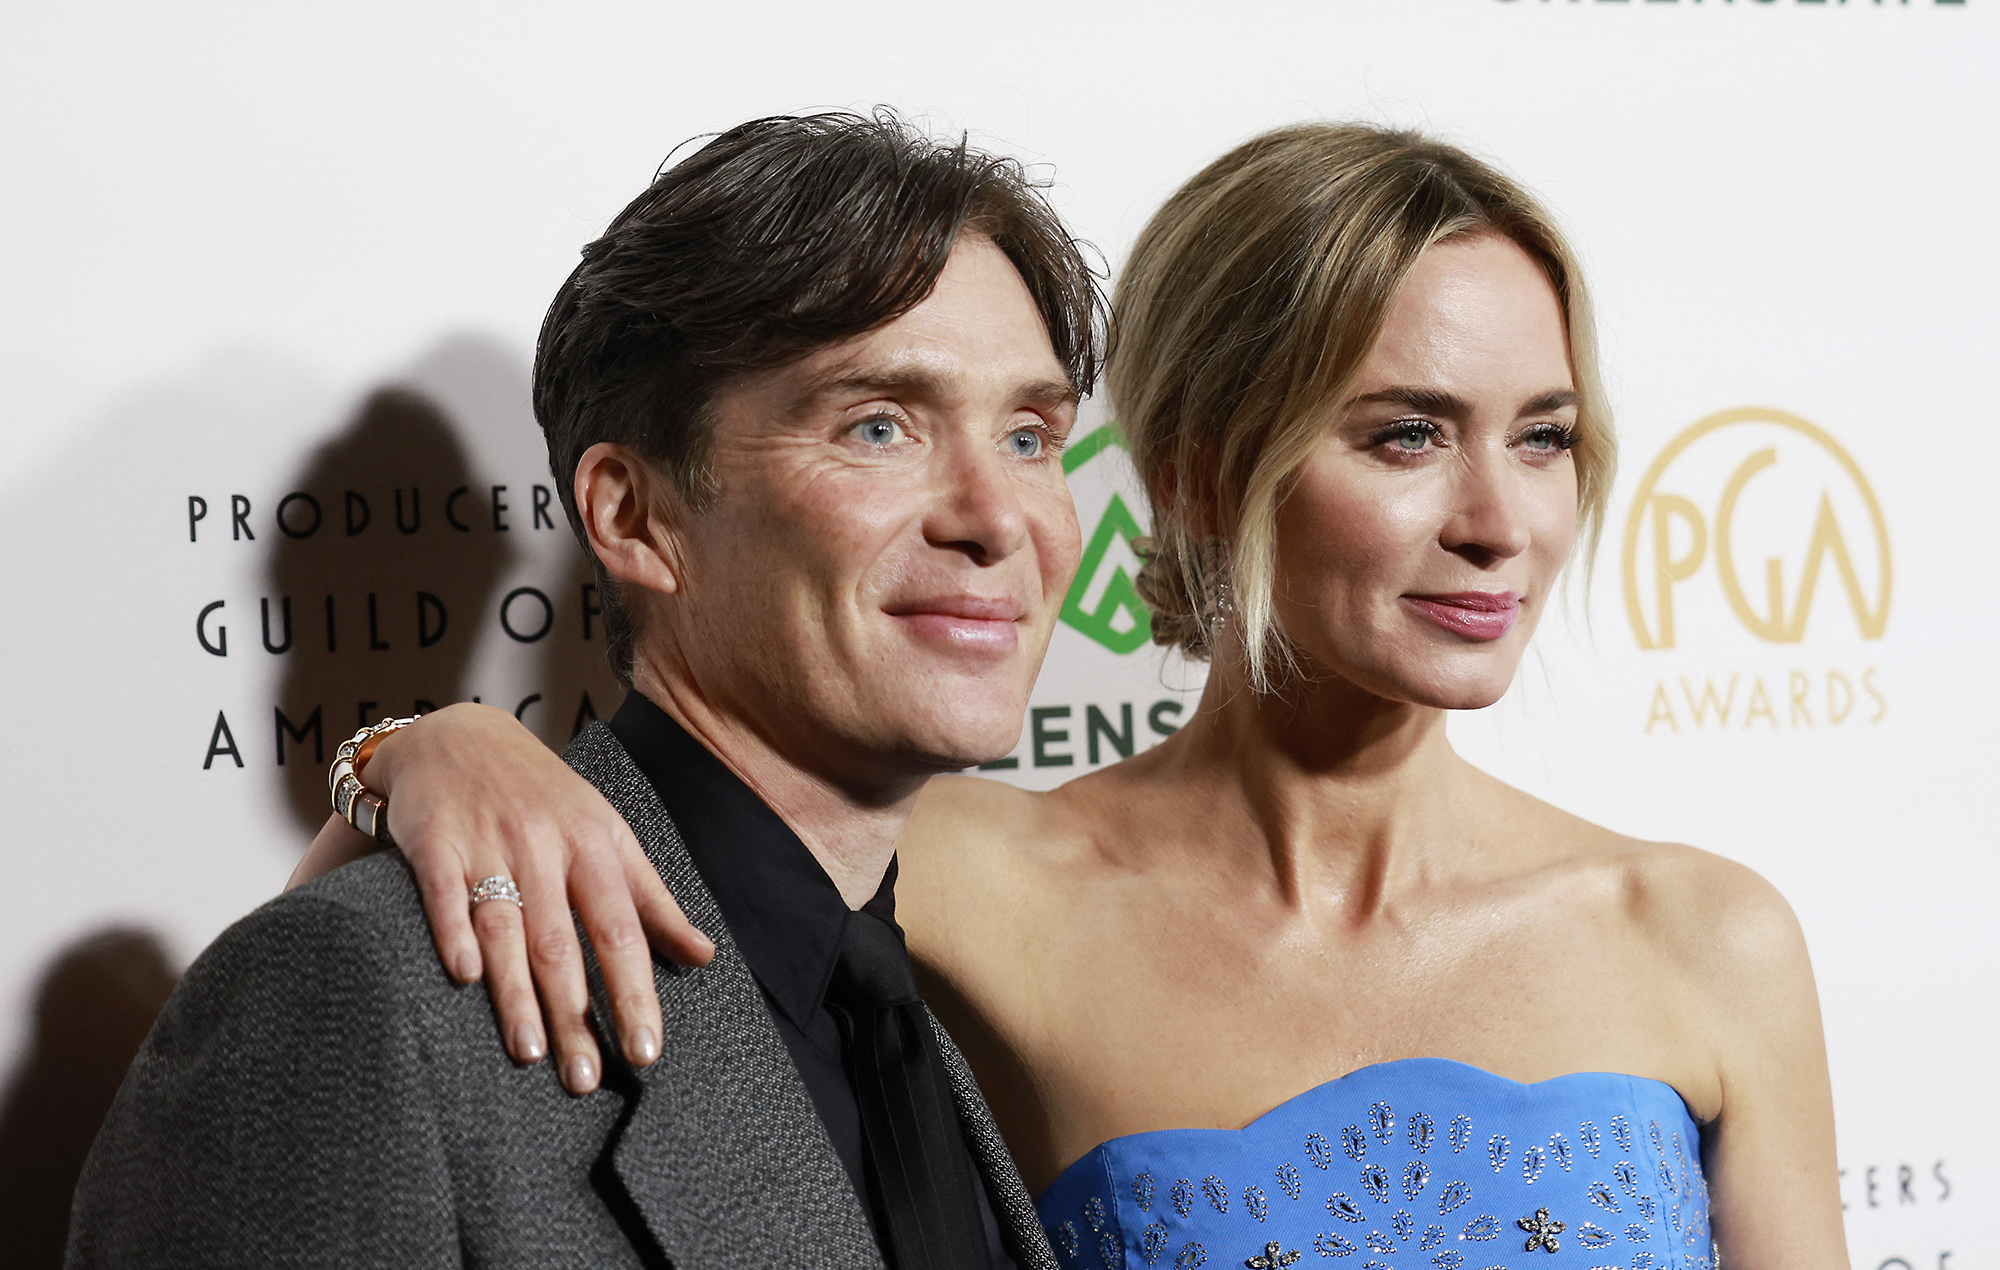 Cillian Murphy and Emily Blunt